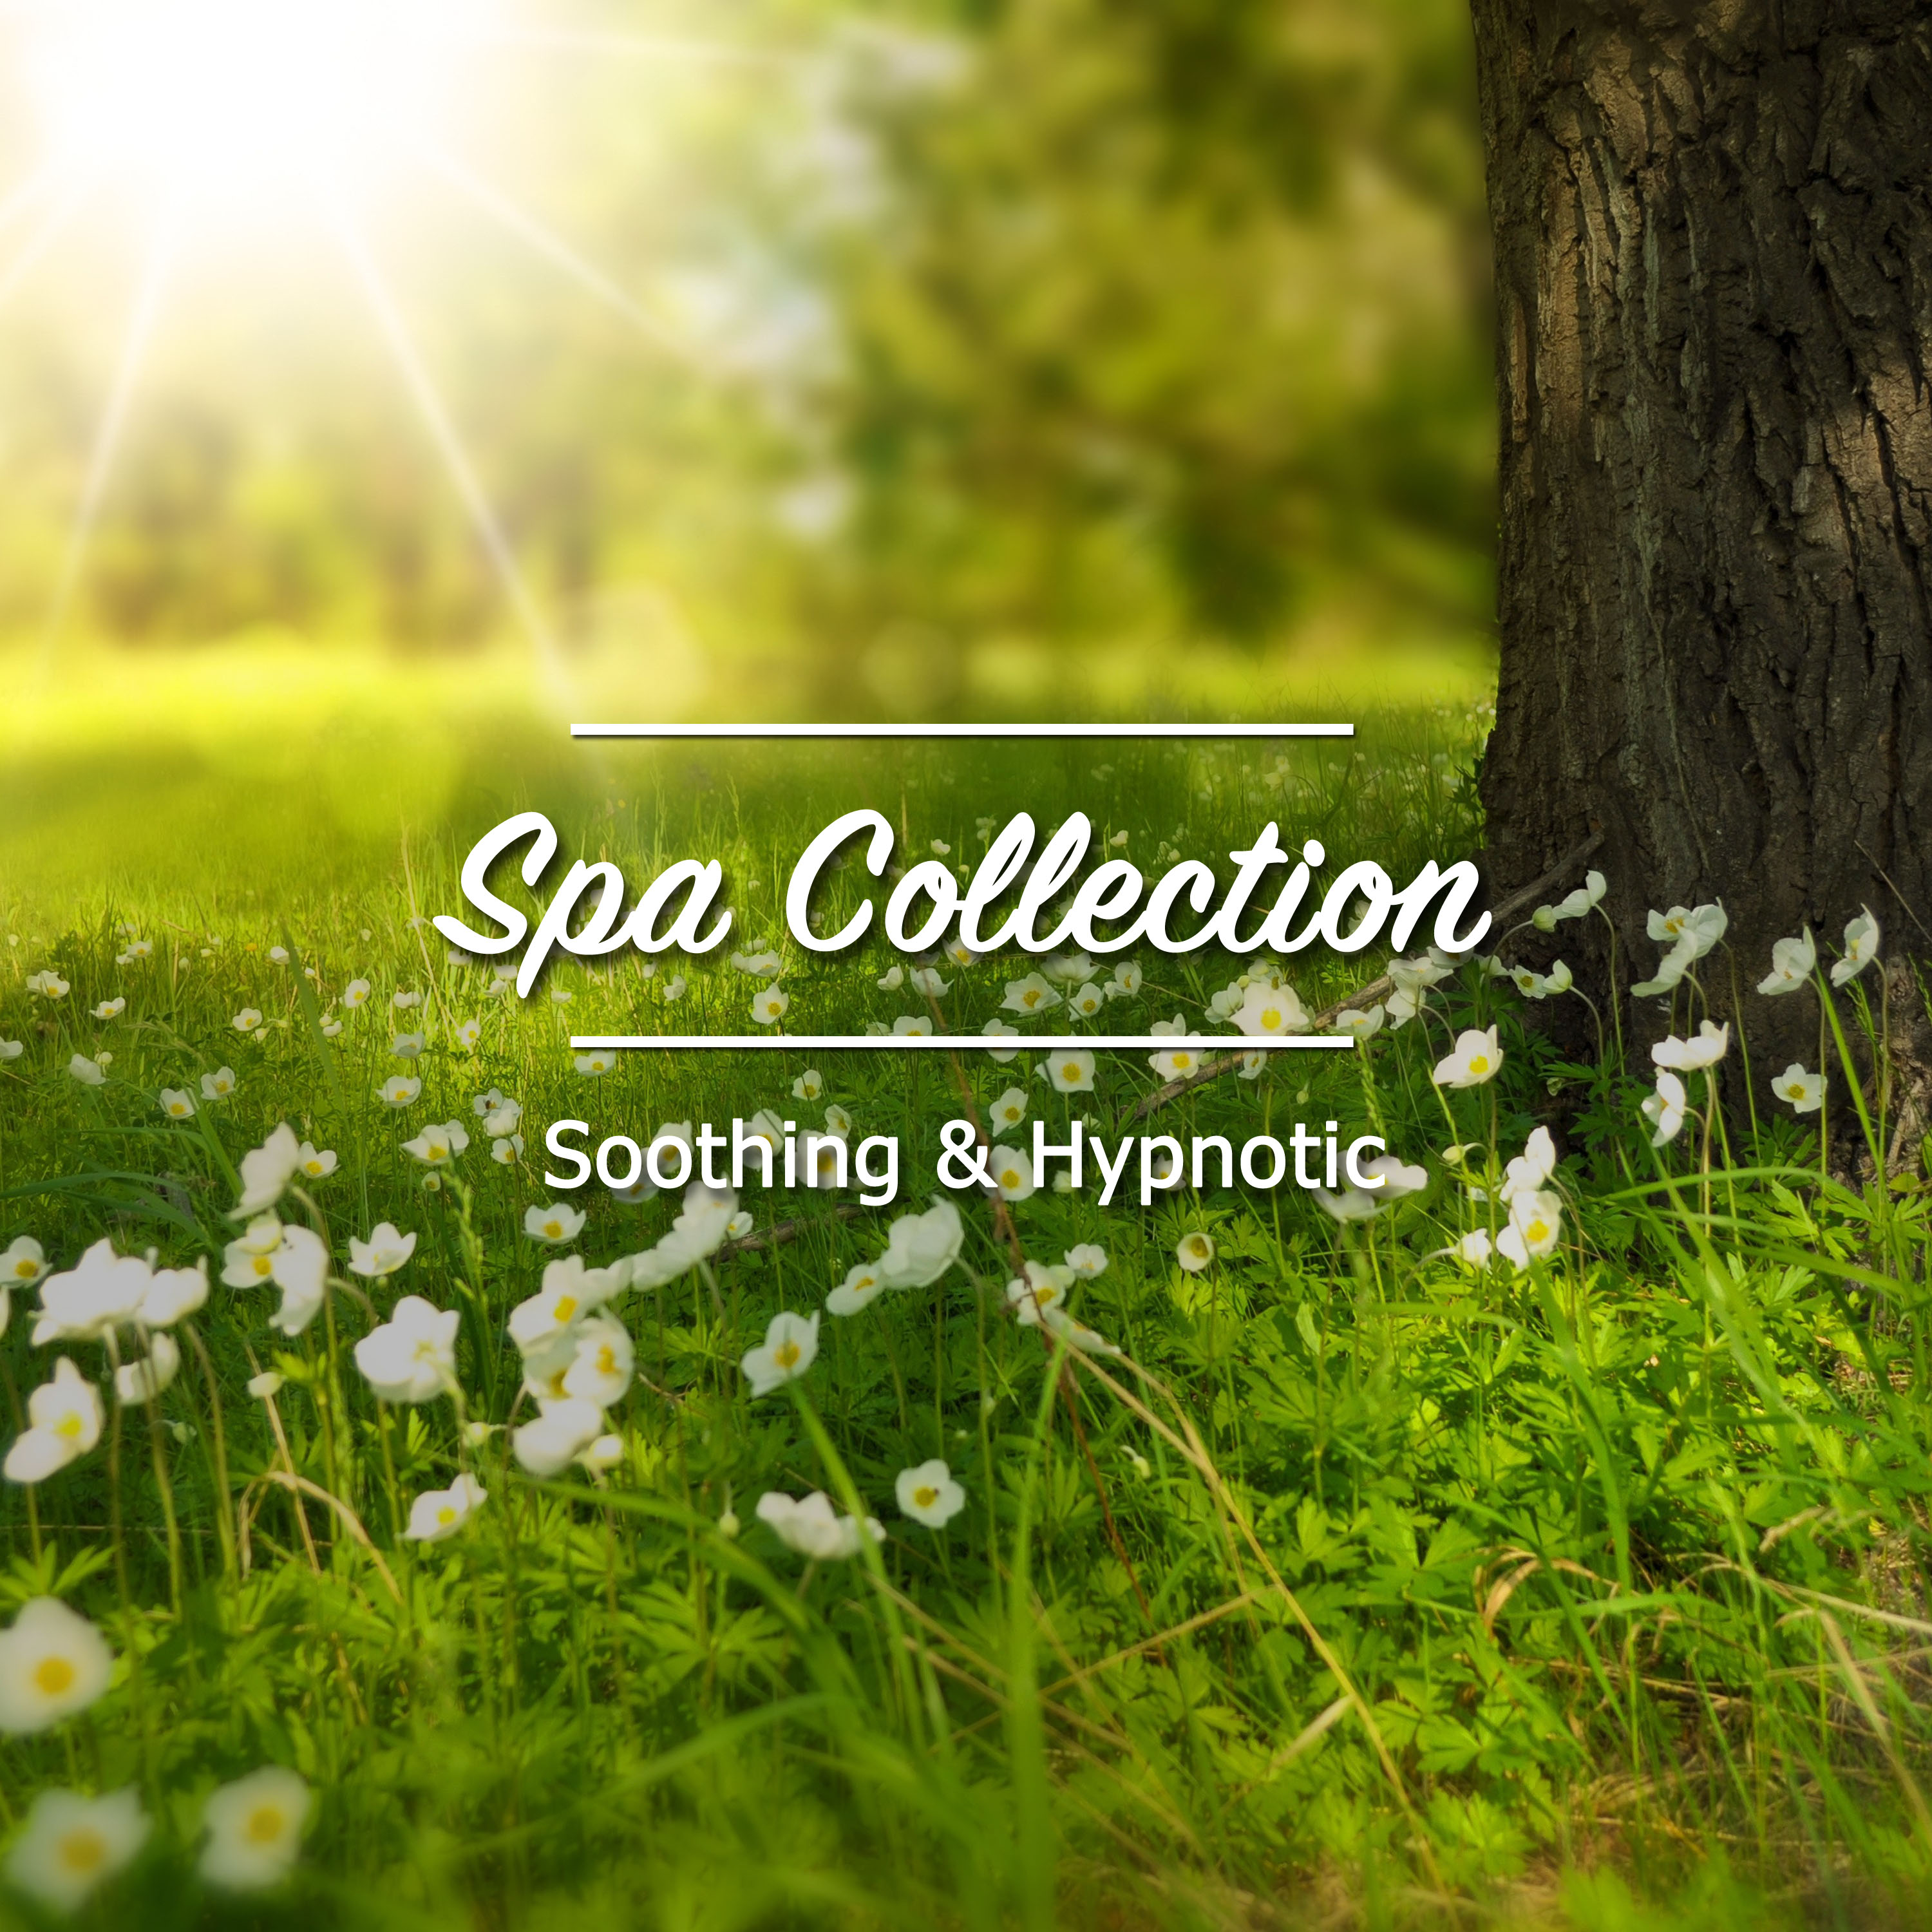 19 Songs for Spa Collection: Soothing and Hypnotic